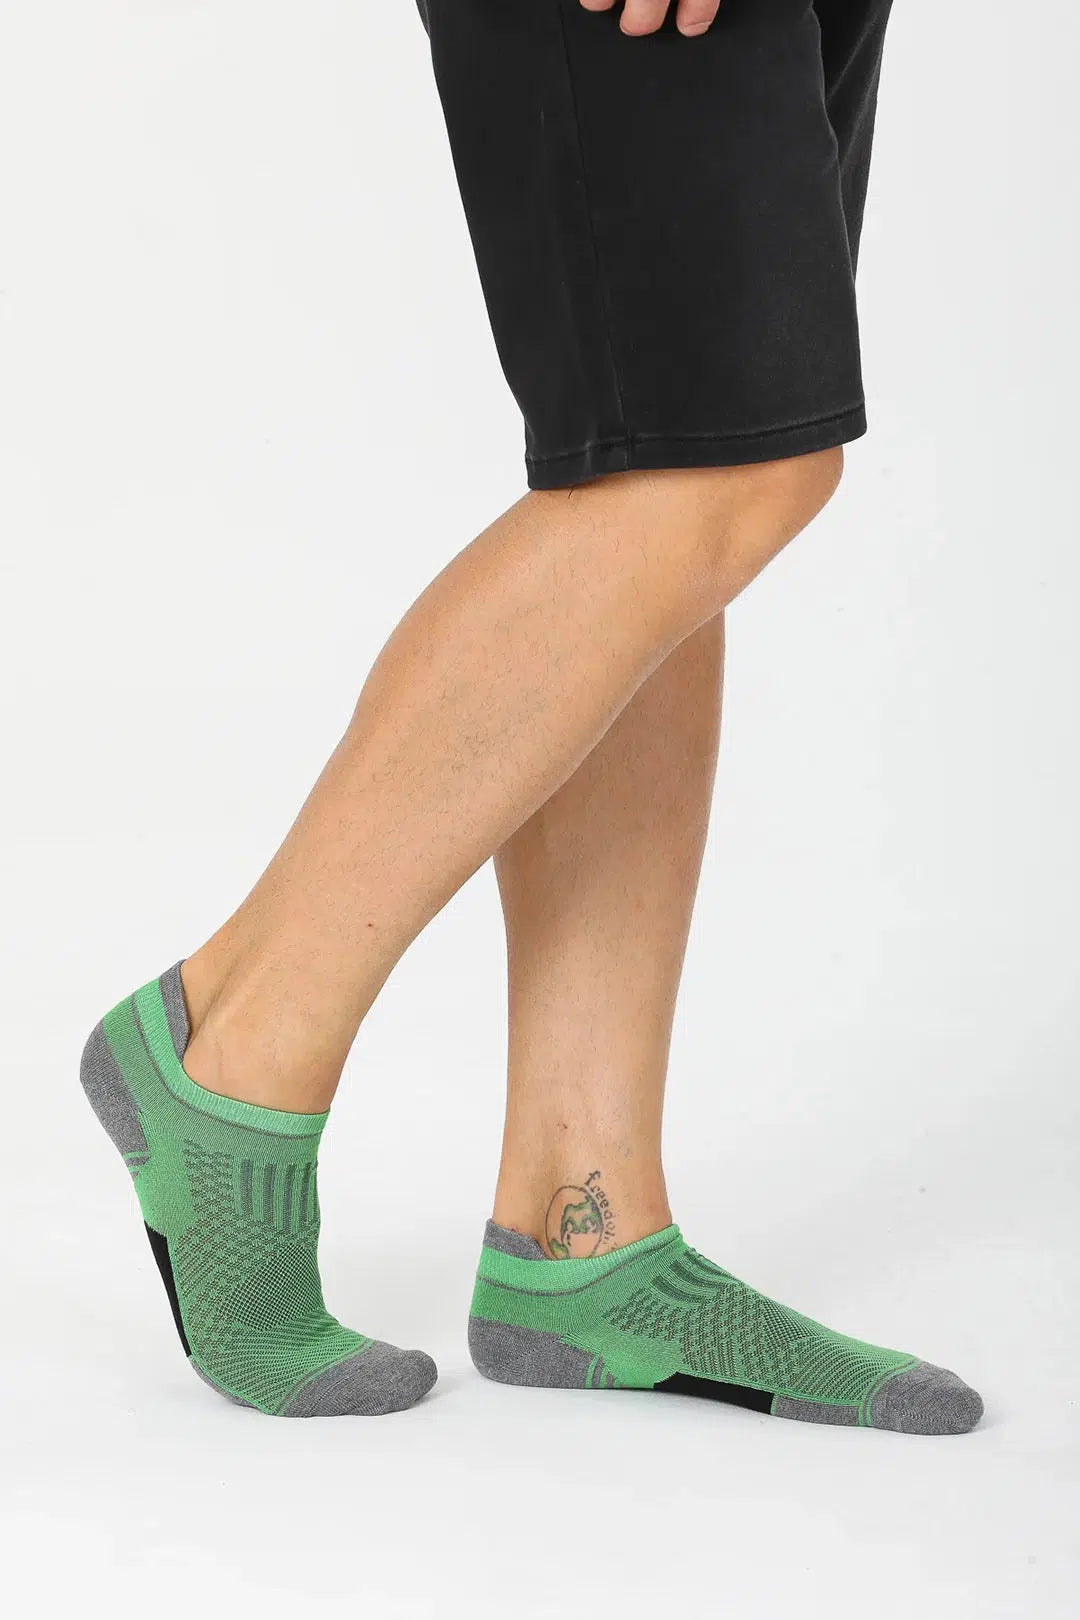 GoWith-men-green-low-cut-athletic-socks